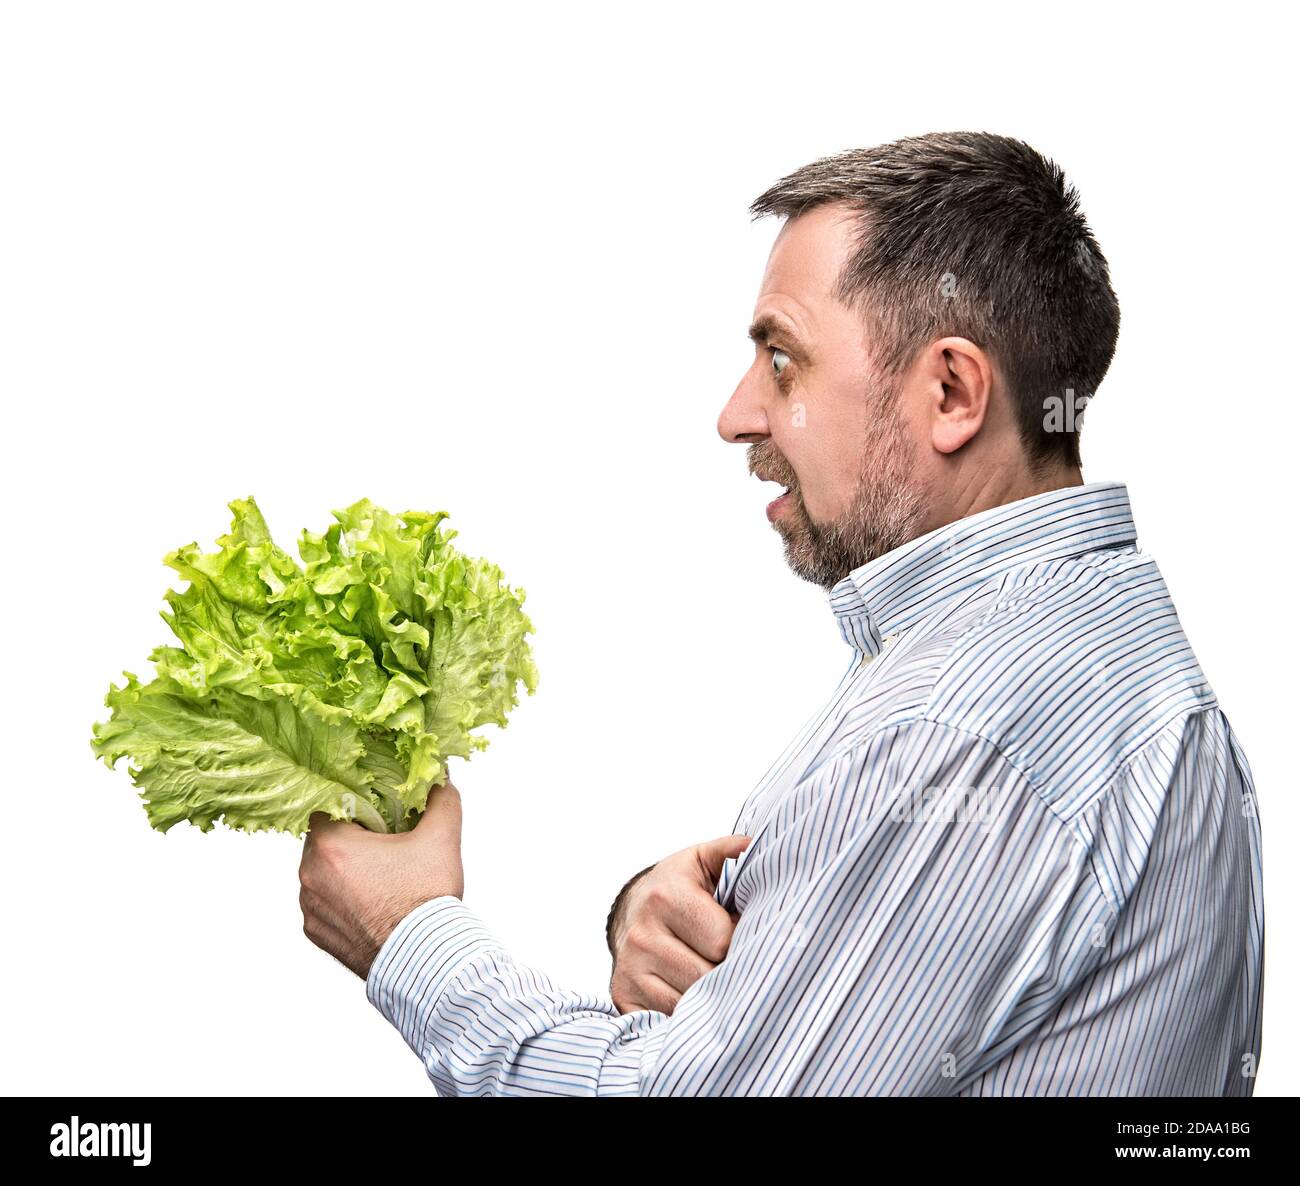 Healthy food. Man holding lettuce isolated on white Stock Photo